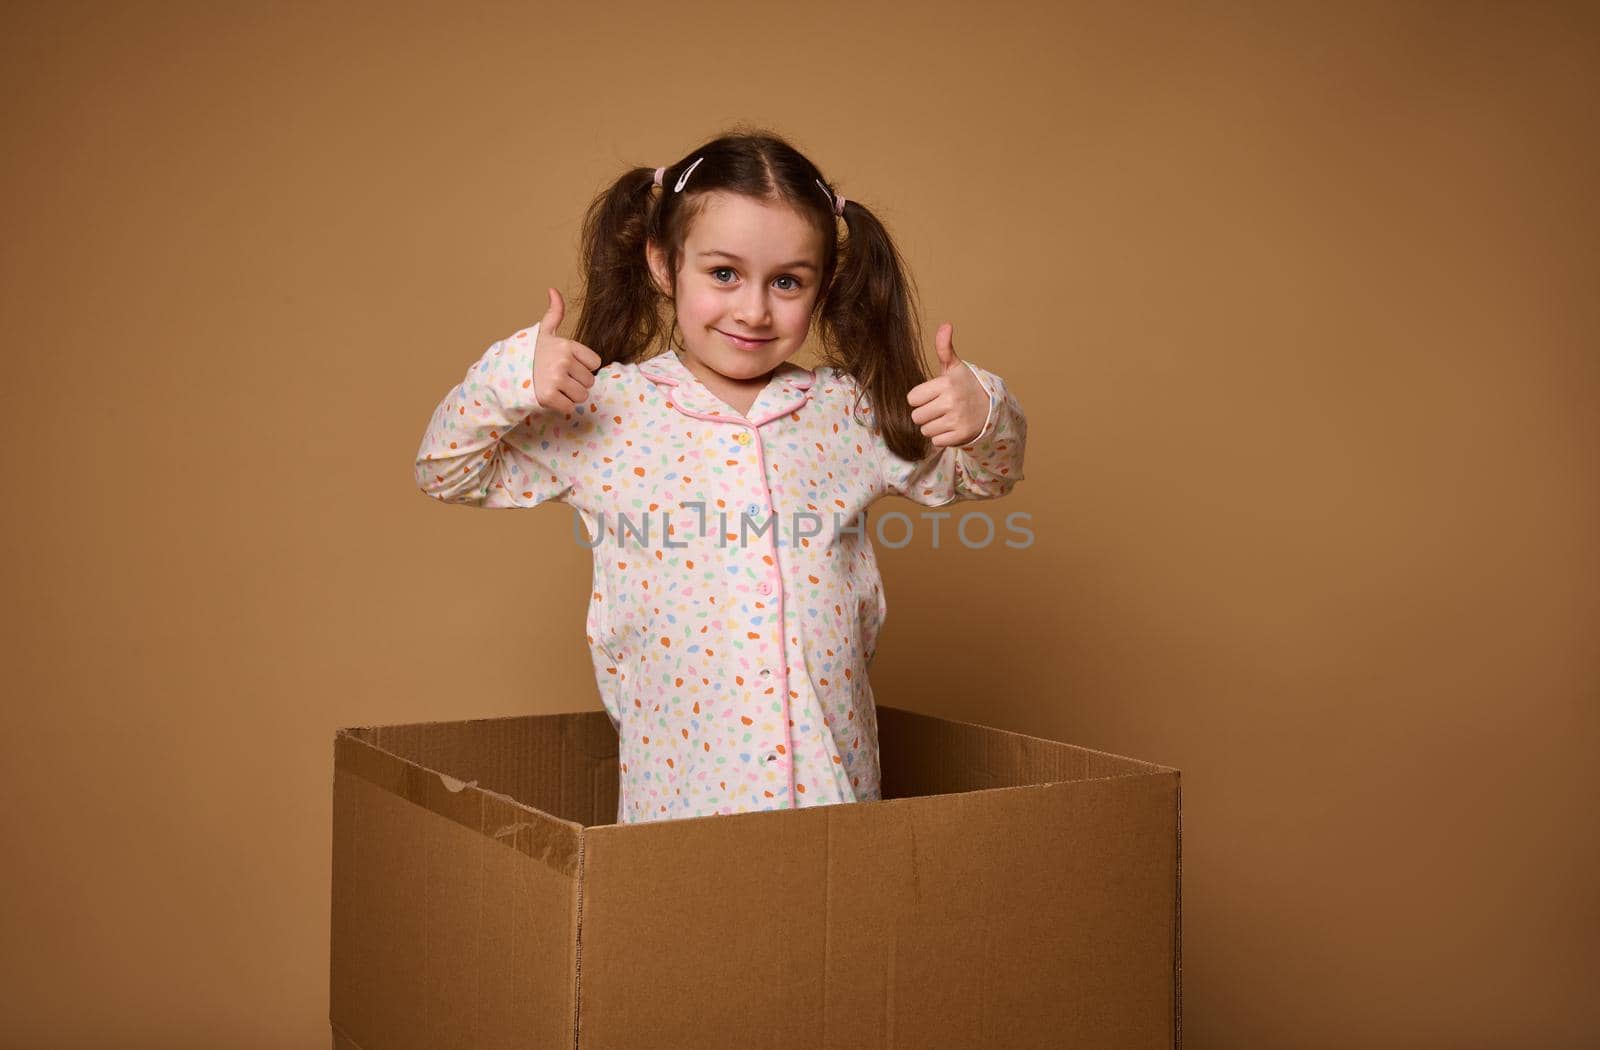 Charming cheerful child, pretty baby girl showing thumbs up, being inside a cardboard box against a beige background with copy ad space by artgf